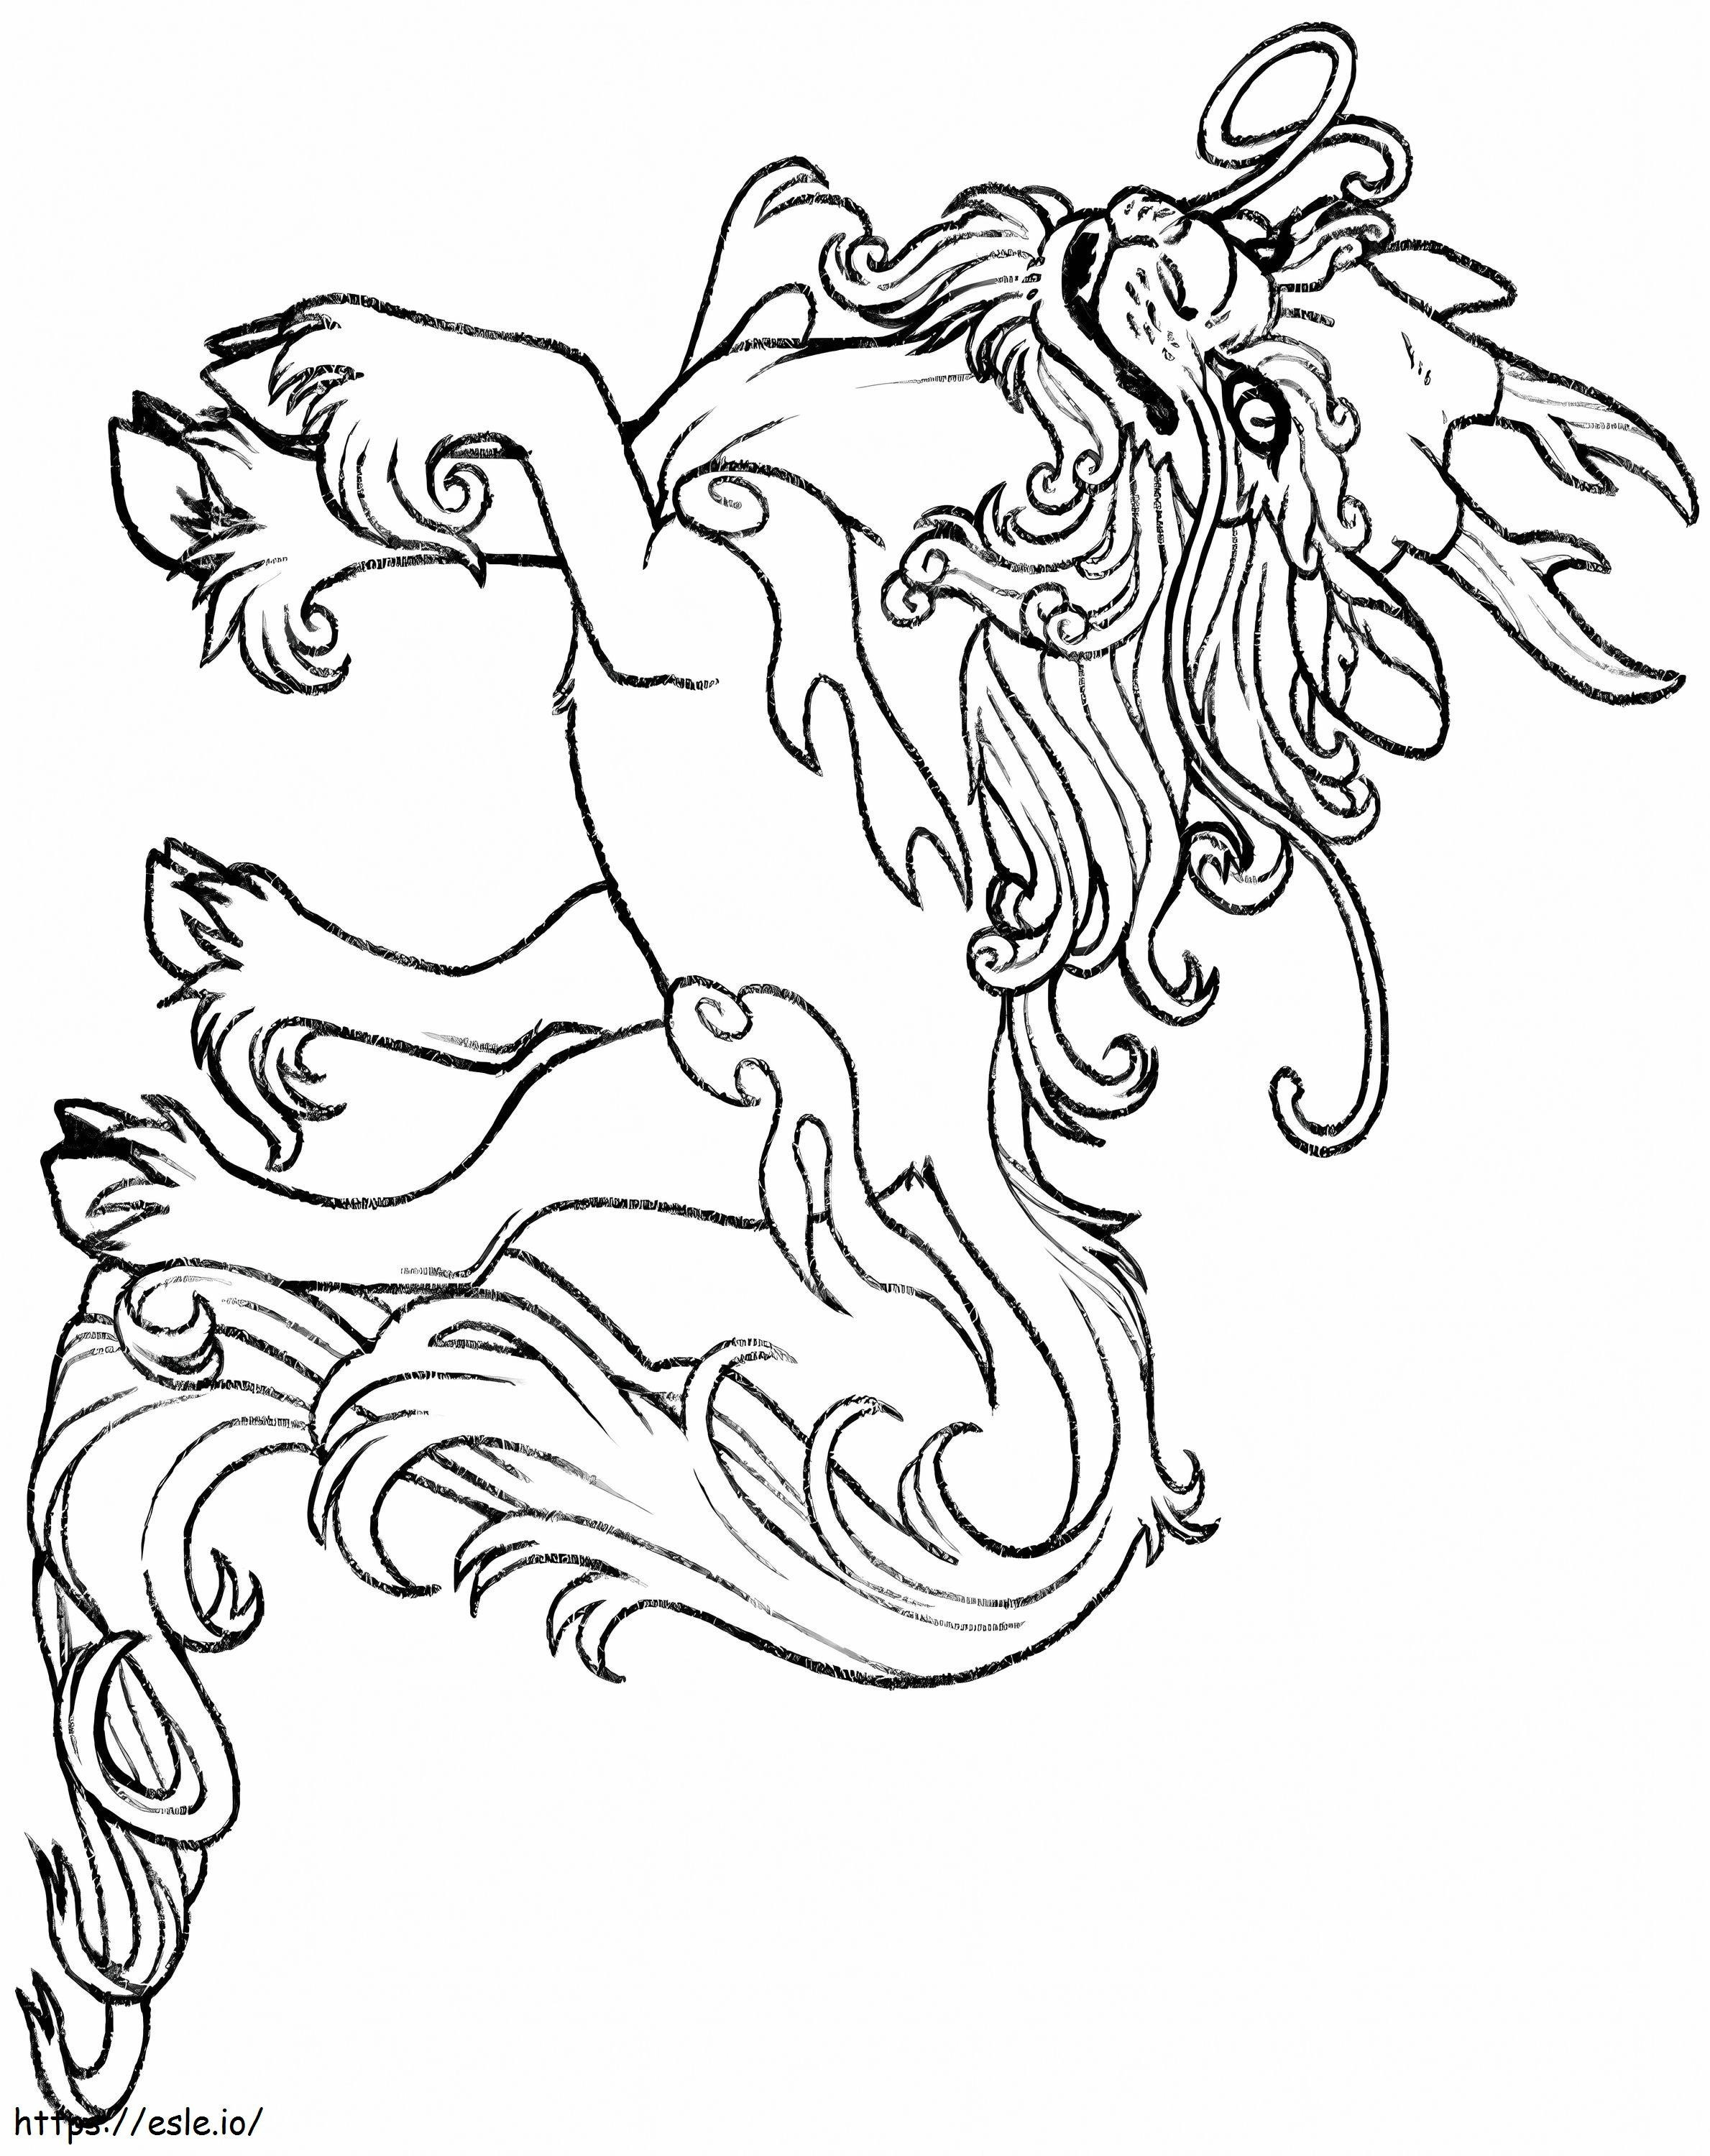 Made Unicorn A4 coloring page